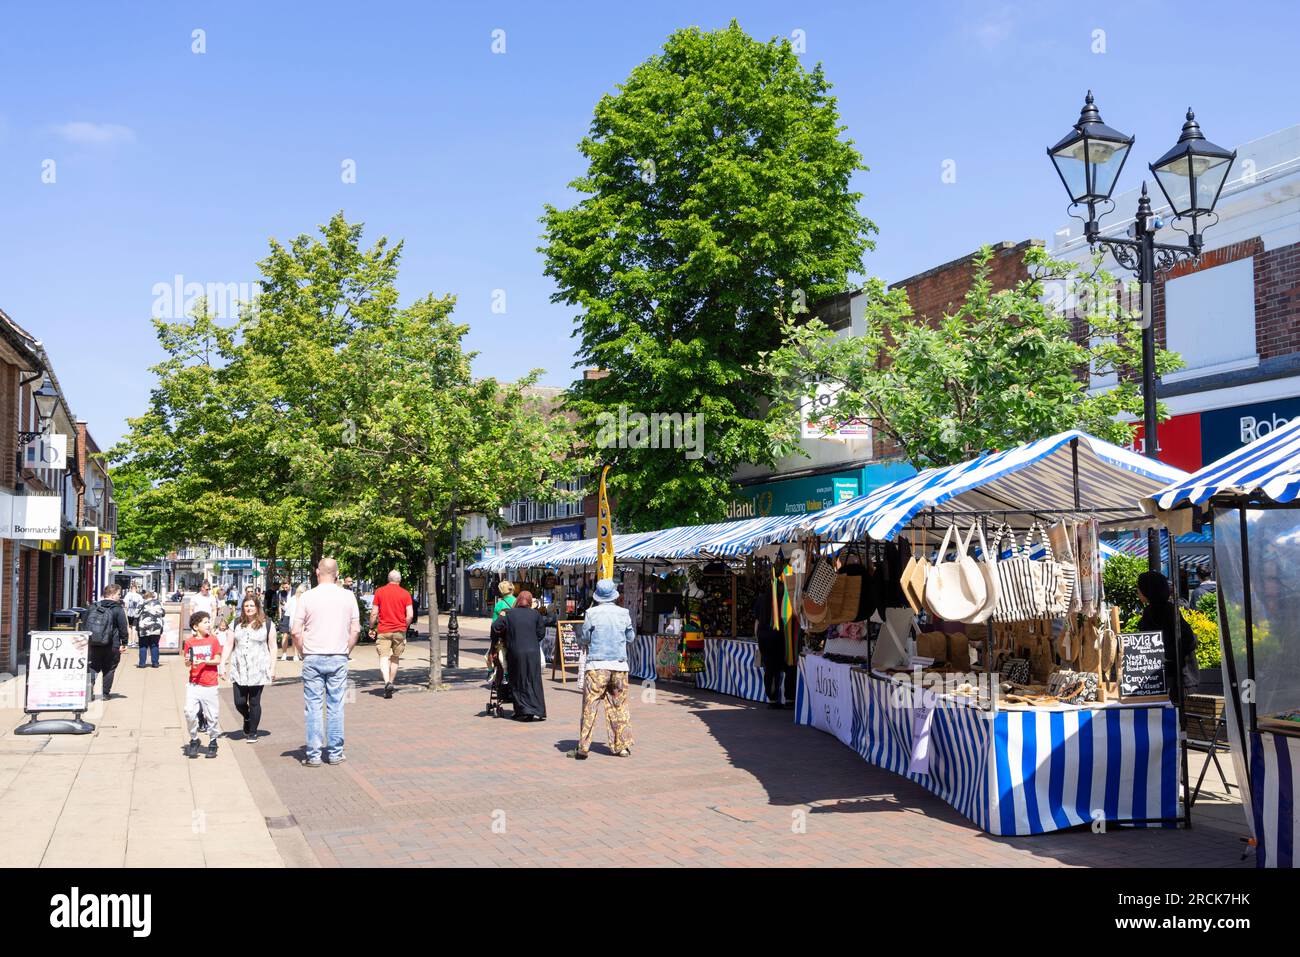 Solihull town centre Sunday market open air market and shops on the high street in Solihull High street Solihull West Midlands England UK GB Europe Stock Photo